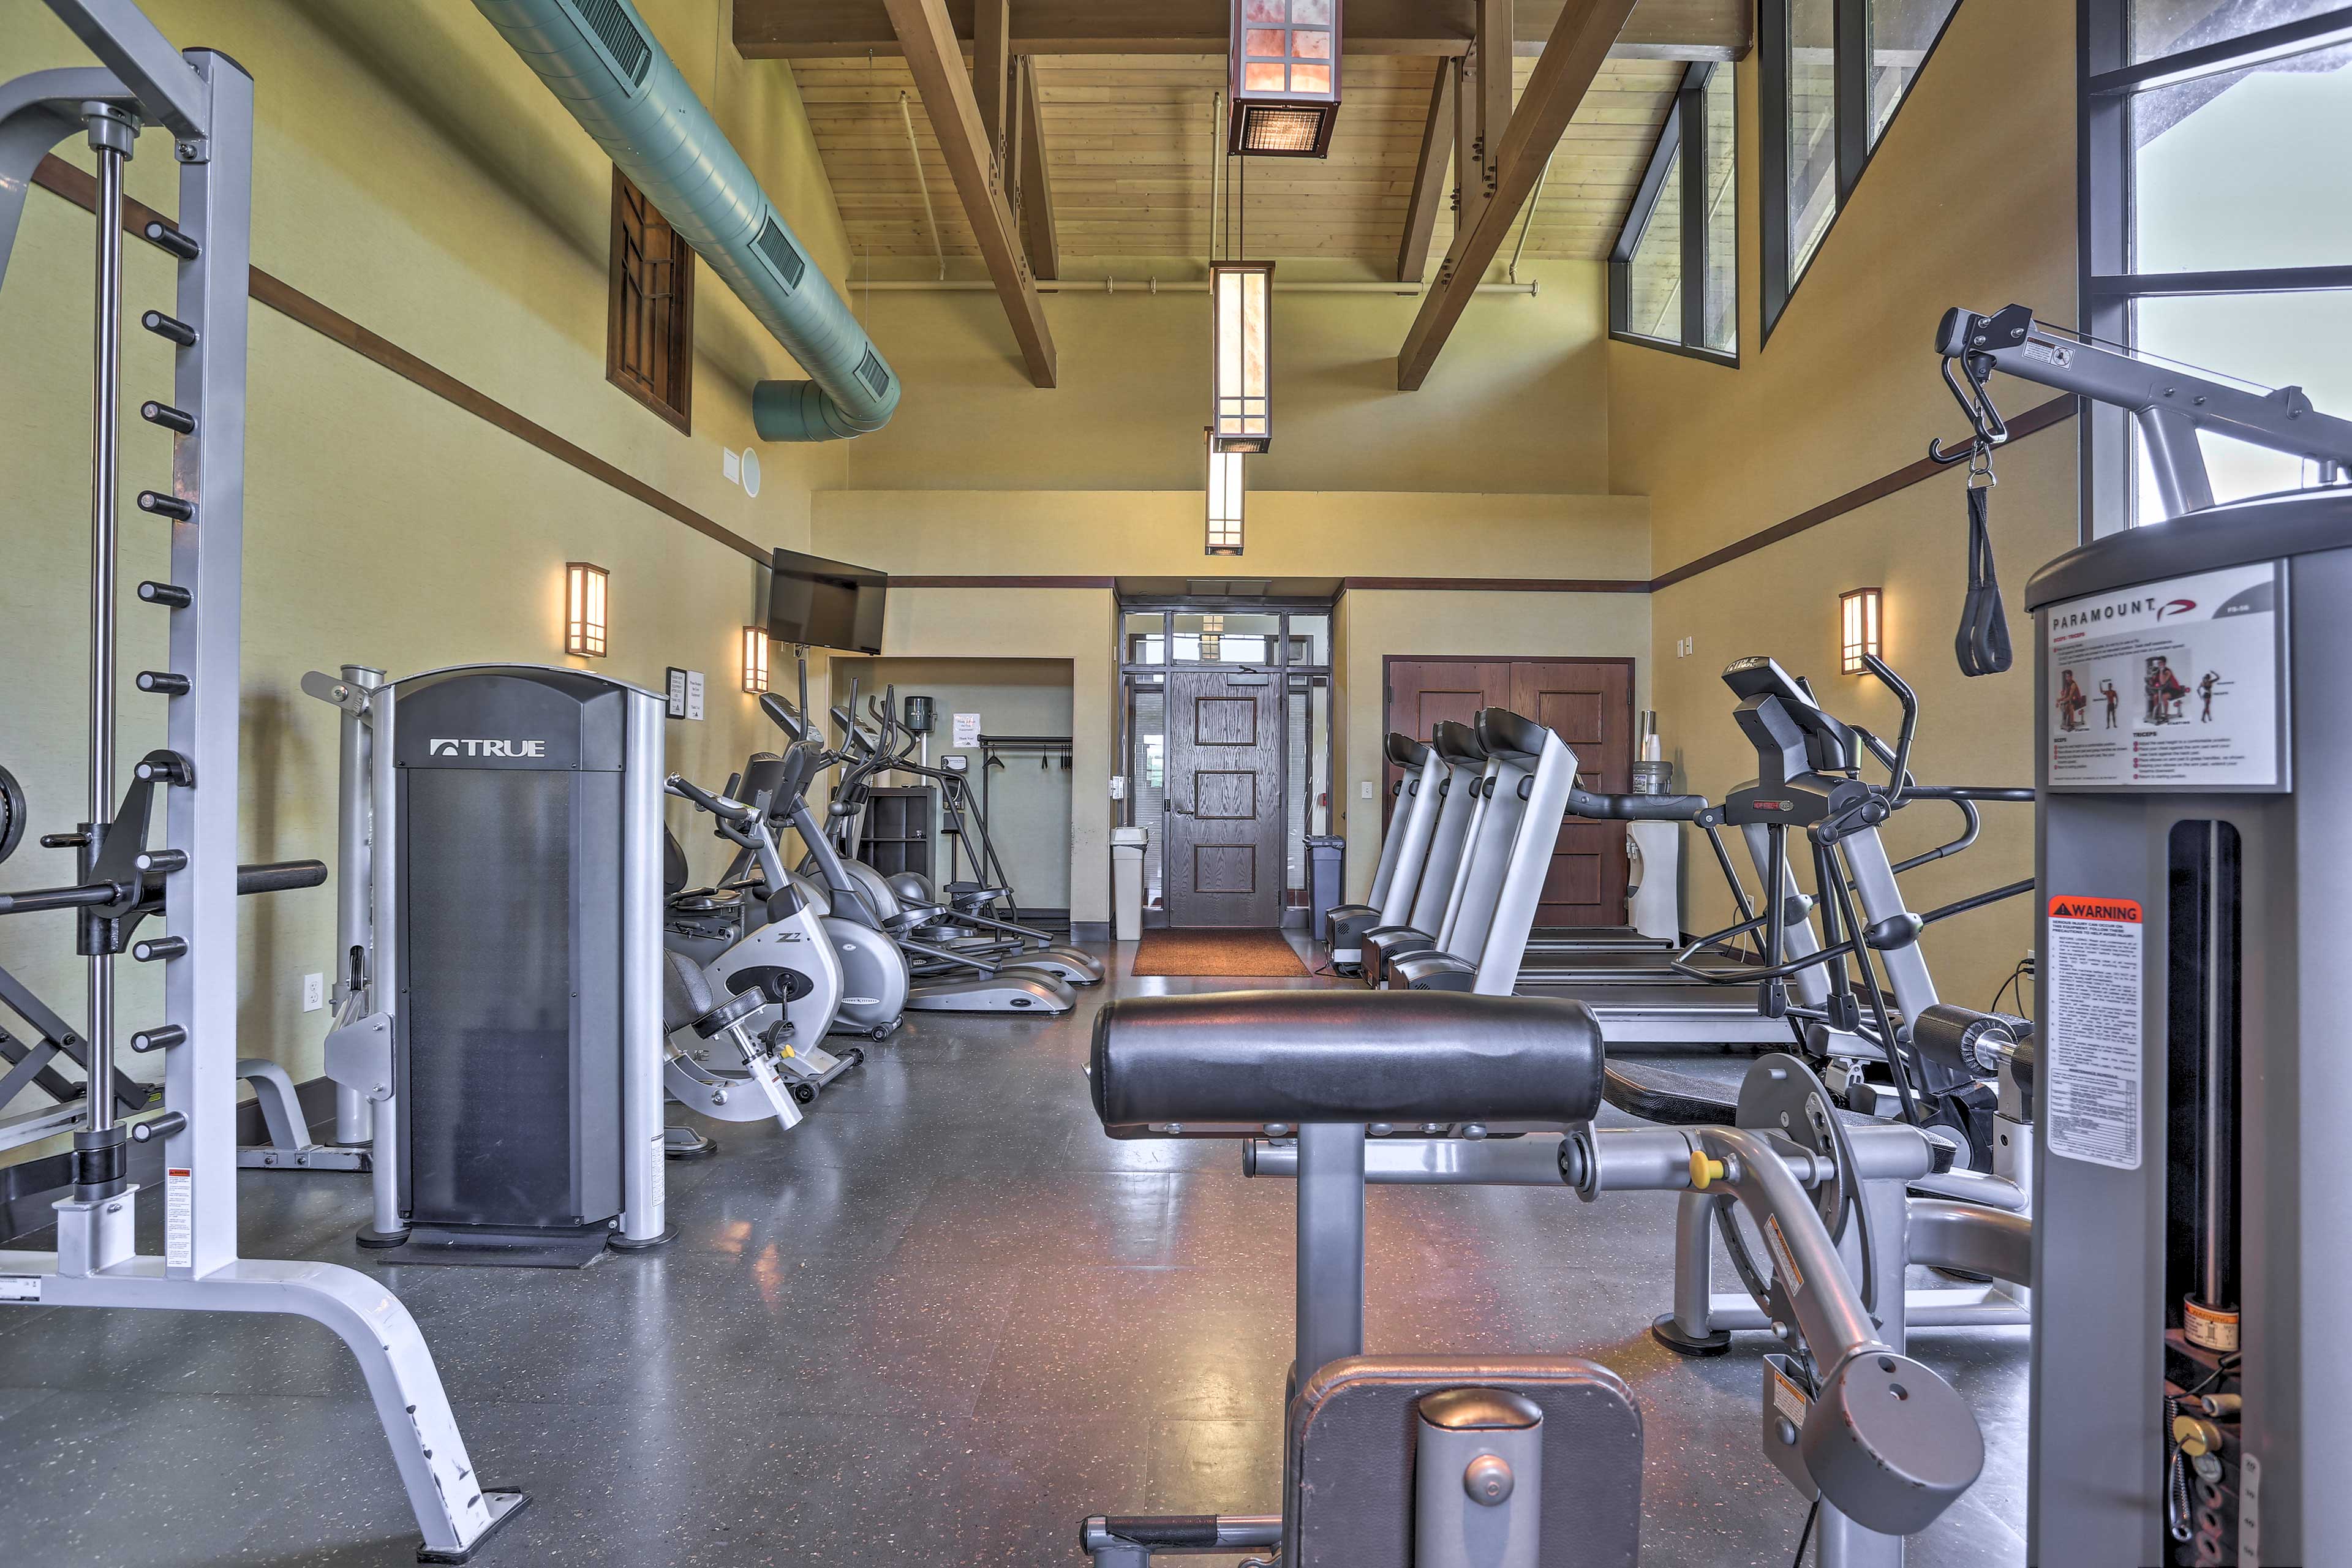 Keep up with your workout schedule in the fitness center.